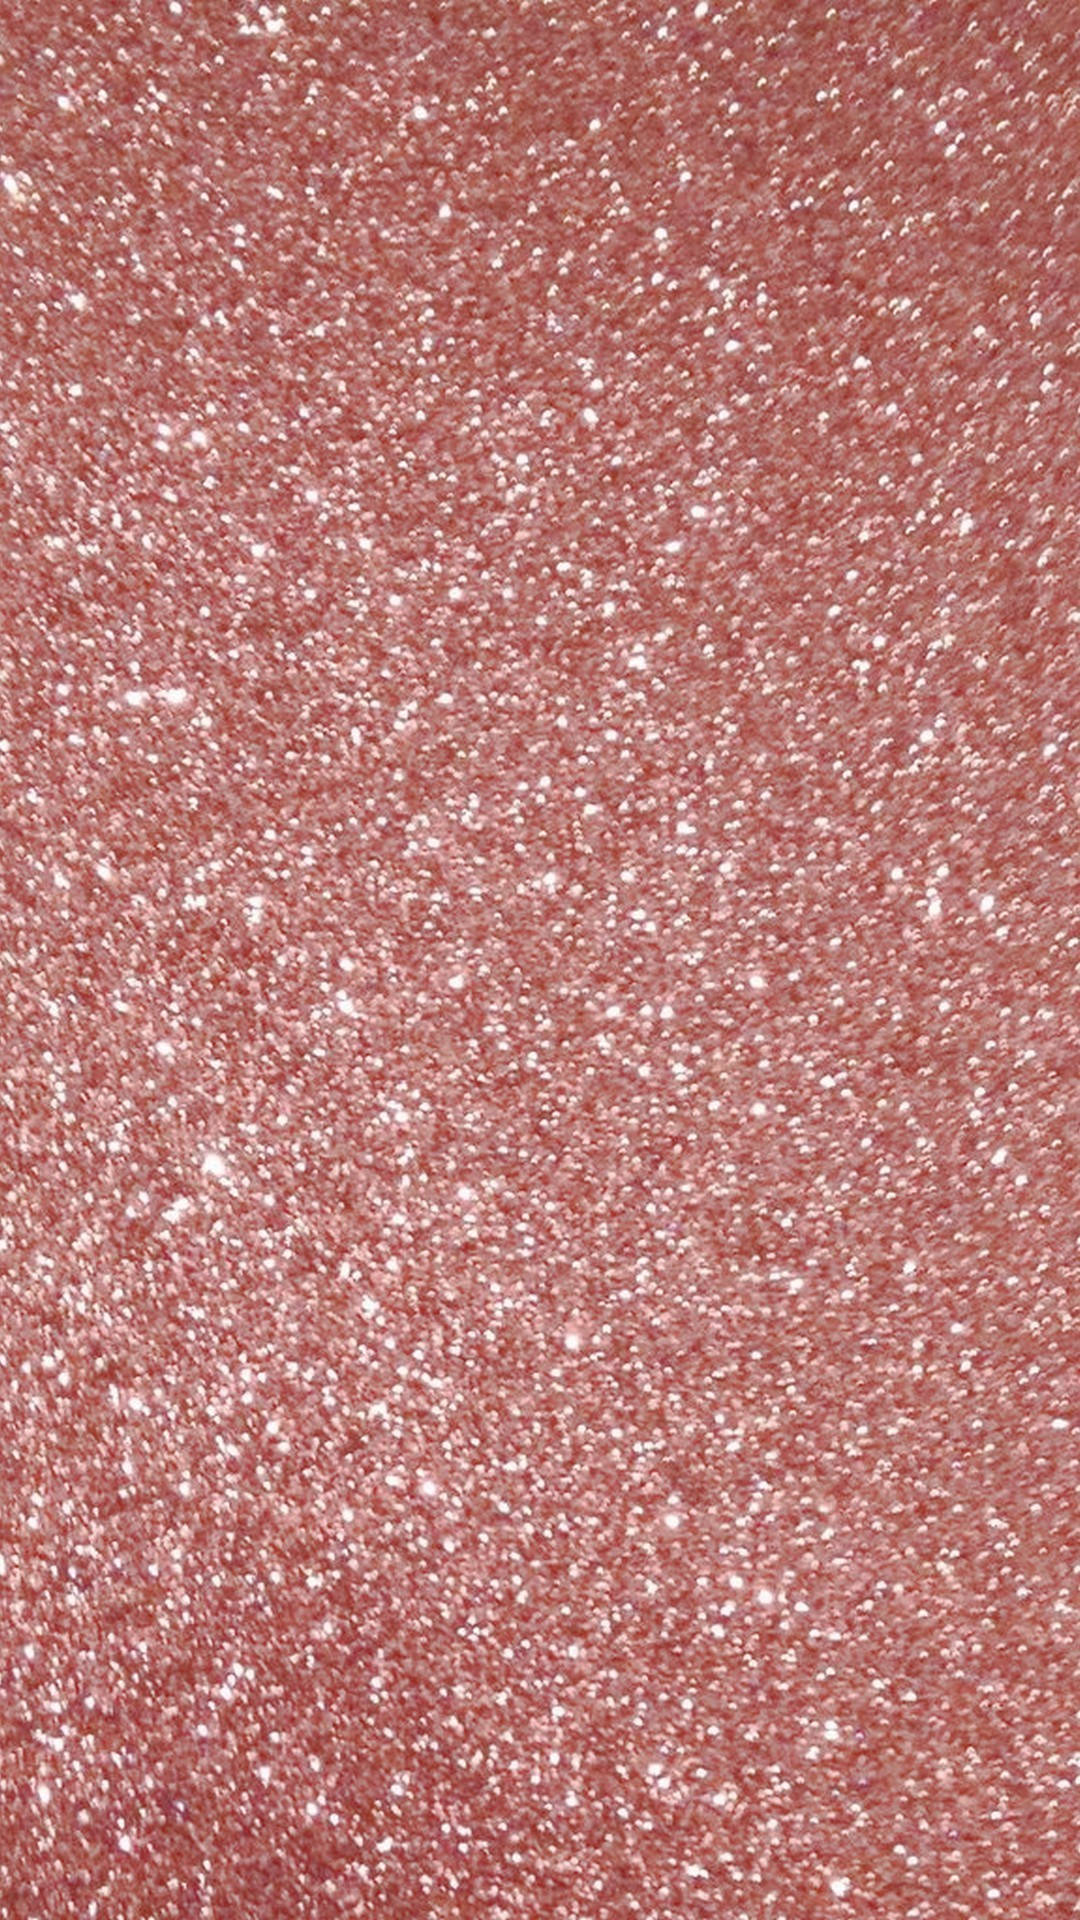 a close up of a pink glittery surface Wallpaper